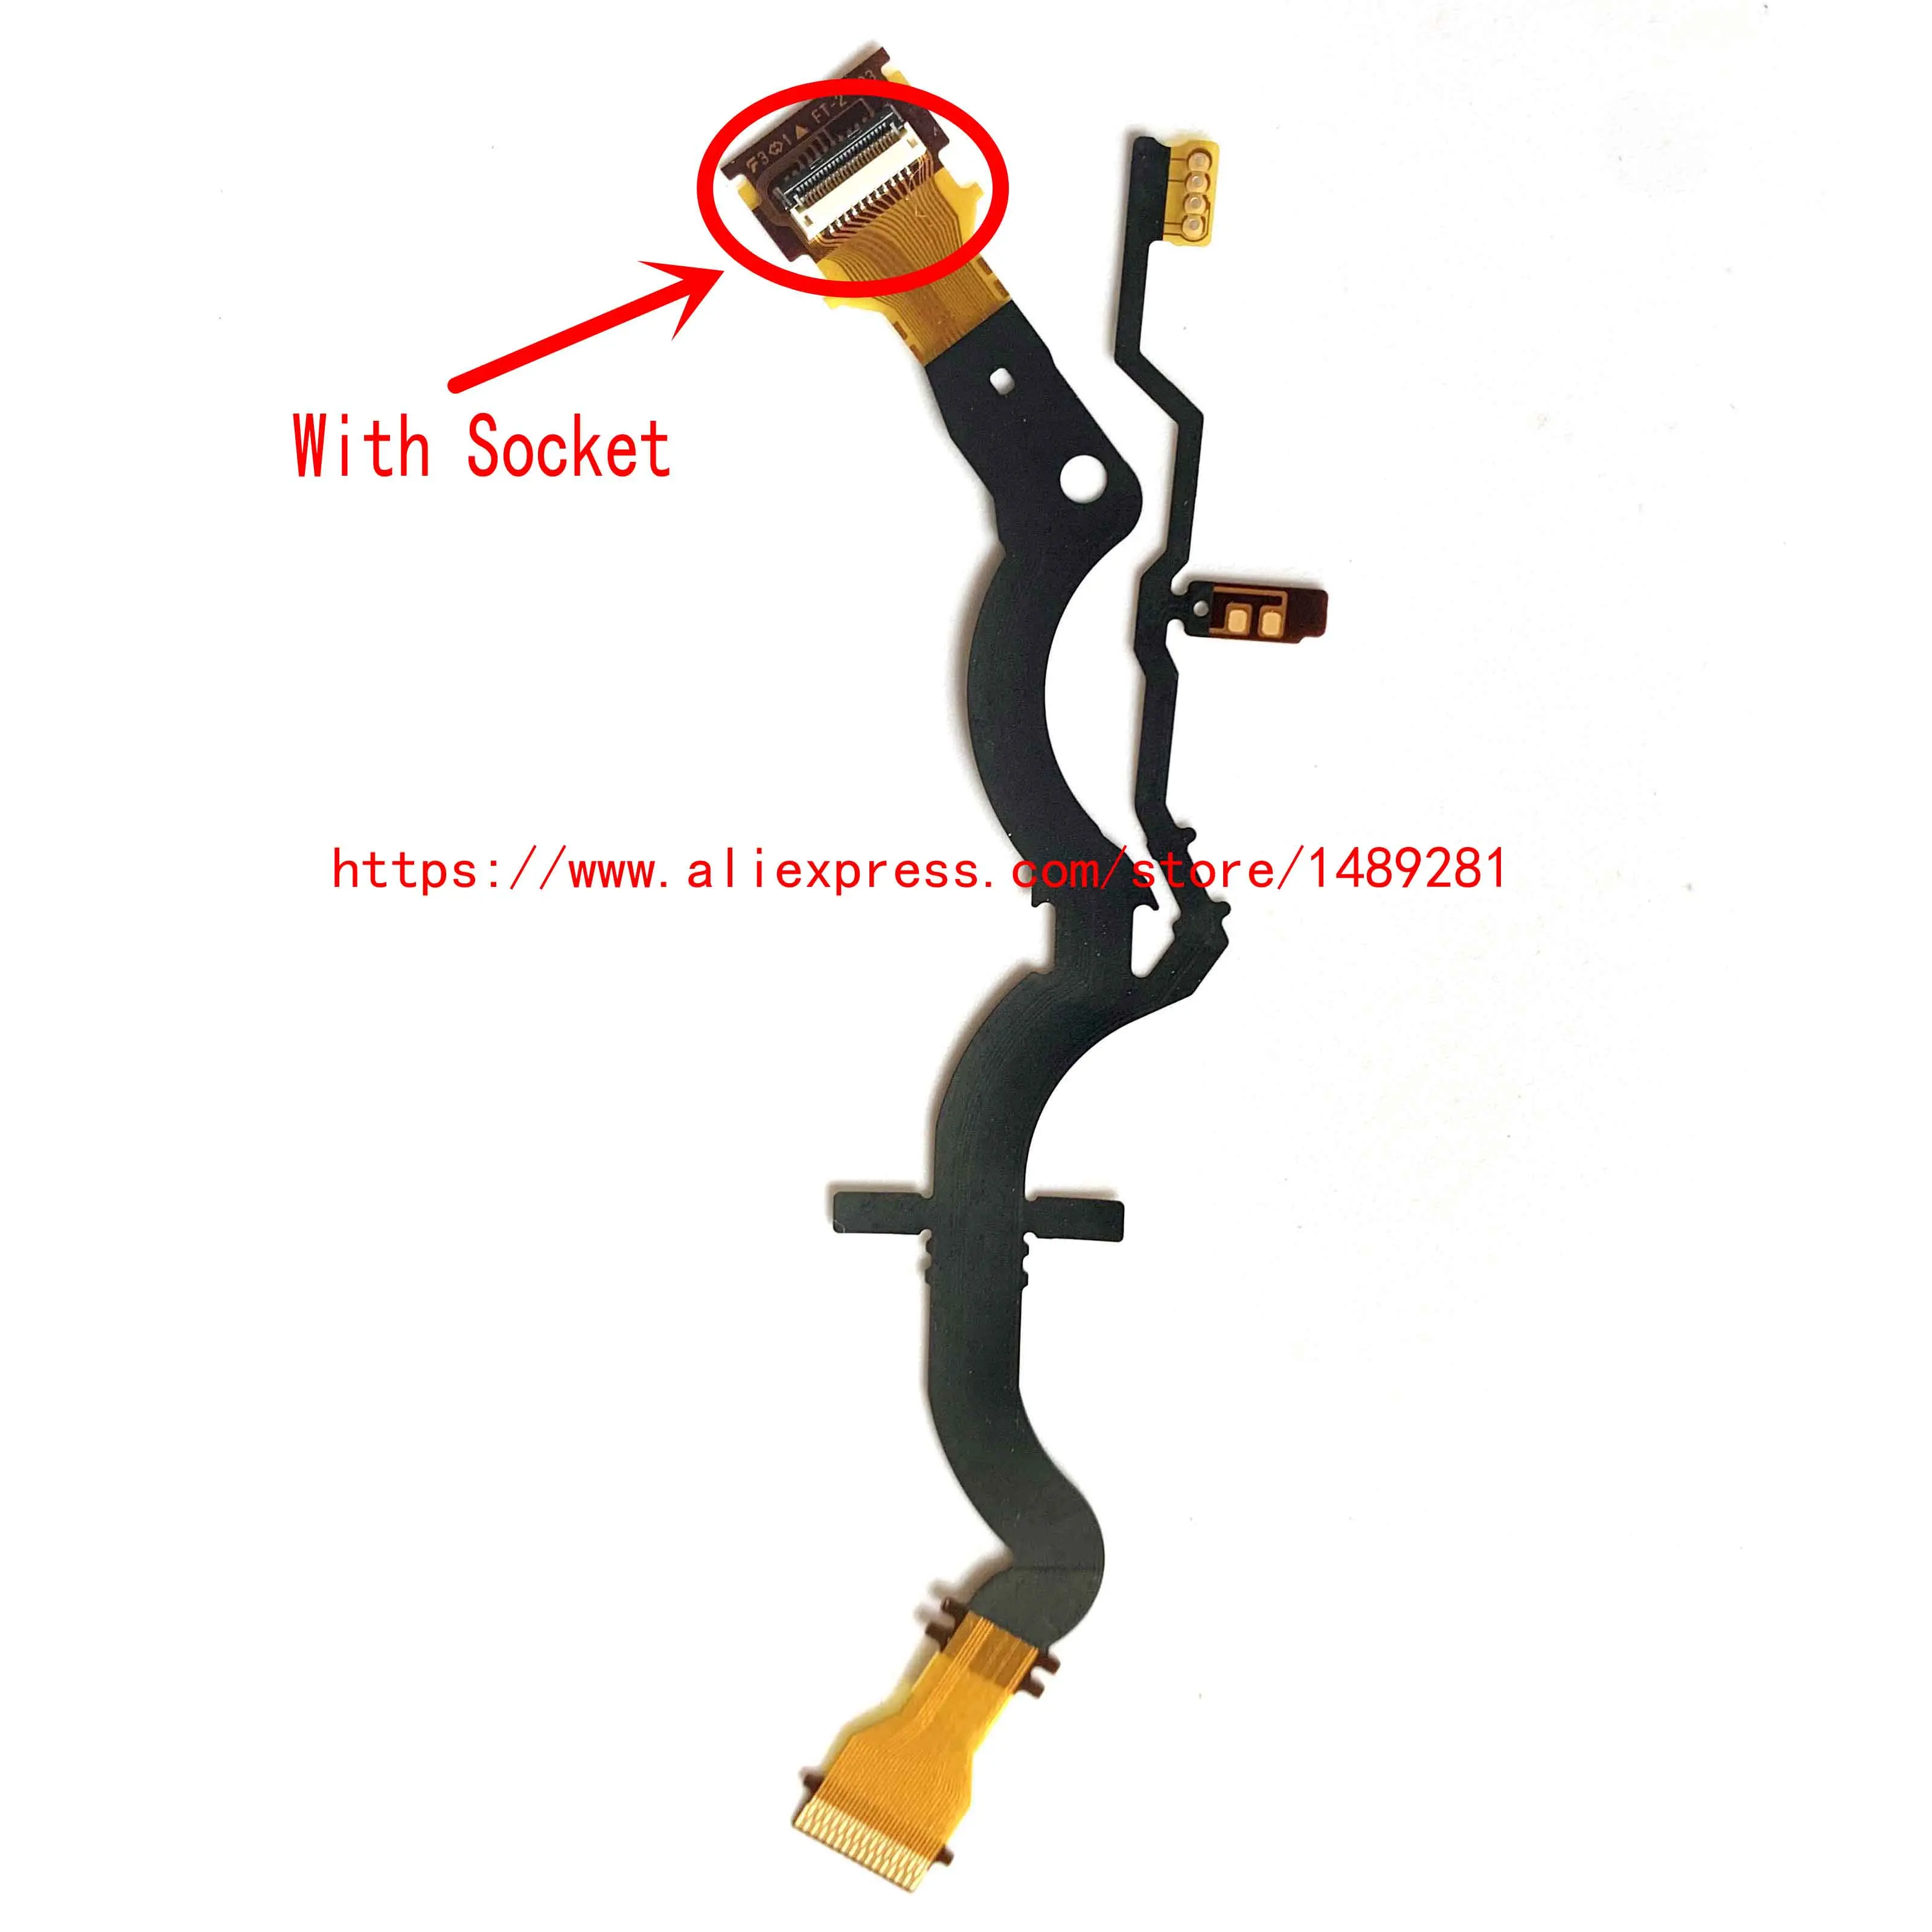 NEW Lens Aperture Flex Cable For SONY E 3.5-5.6/PZ 16-50 mm OSS 16-50mm Repair Part 40.5 + socke base lens contact cable repair parts for sony e pz 16 50 f 3 5 5 6 oss selp1650 lens